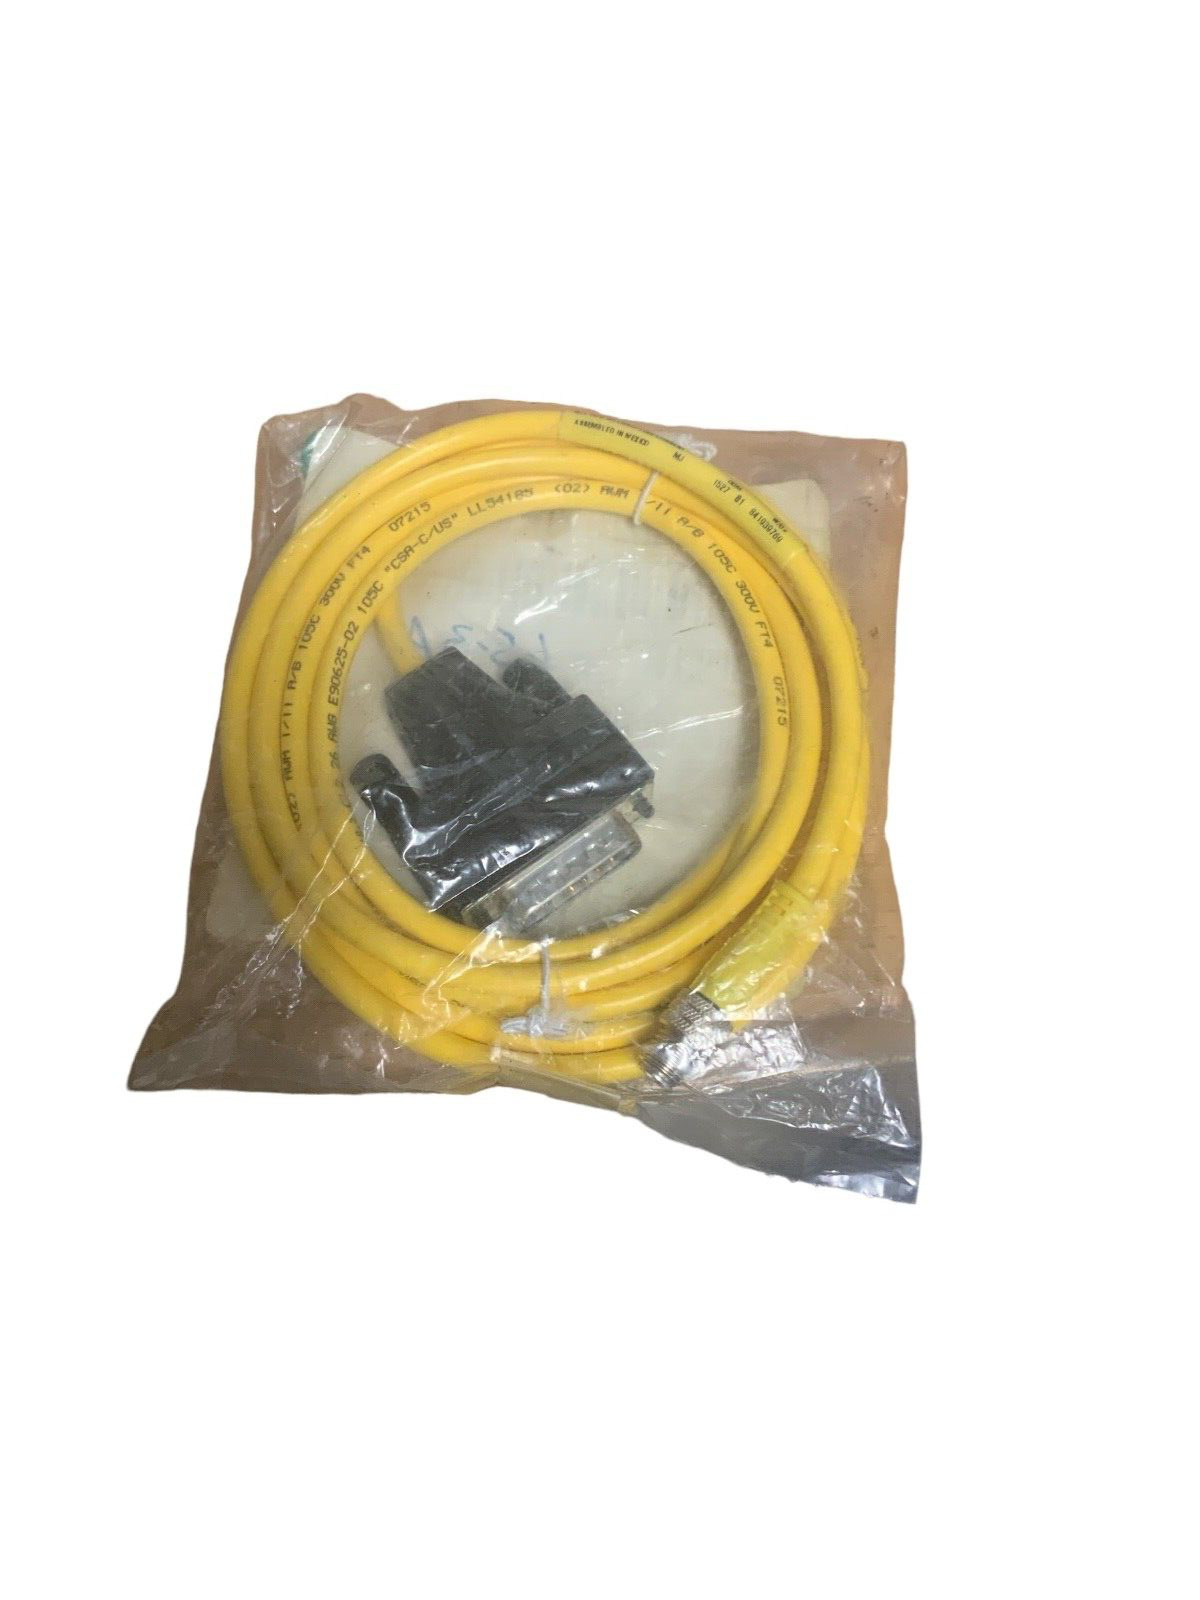 1PCS NEW FOR Cognex Wires and Cables CCB-M8DSIO-02 2M